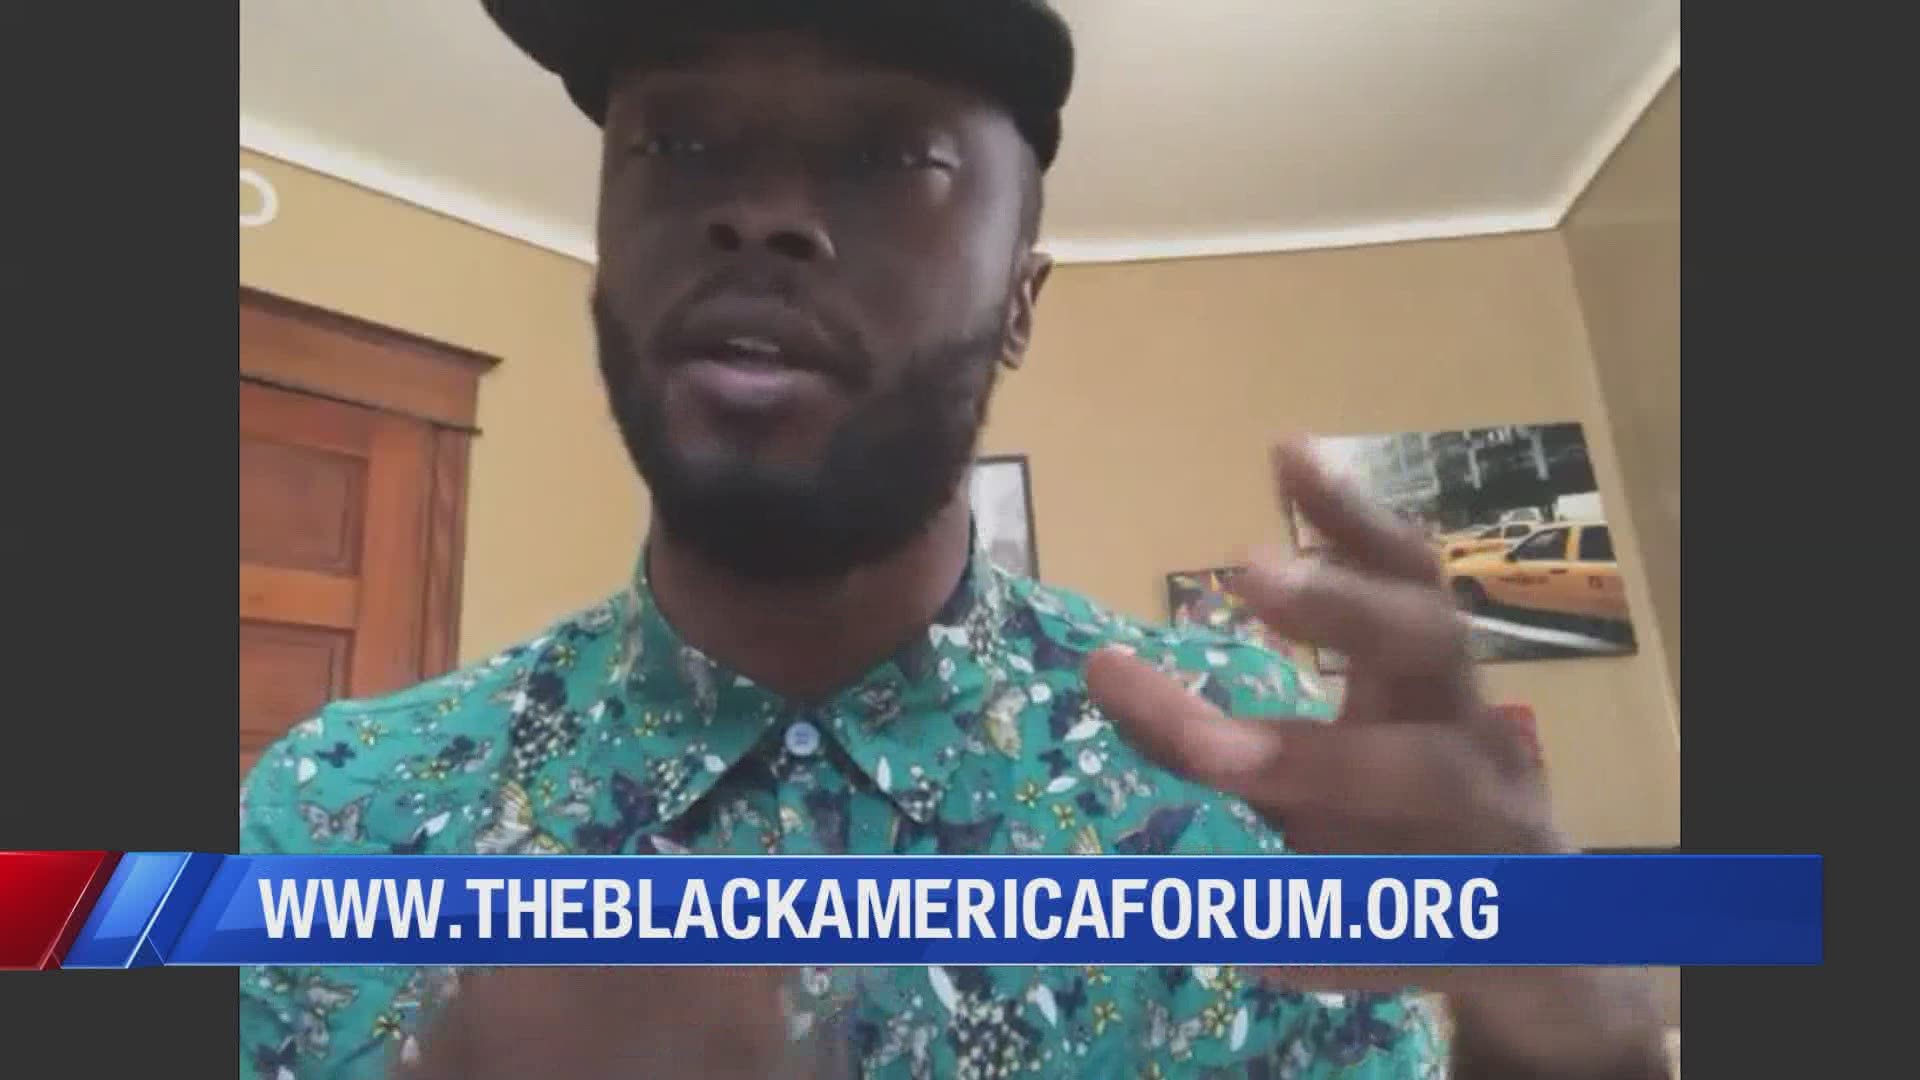 A new website is designed to provide resources for the Black community.